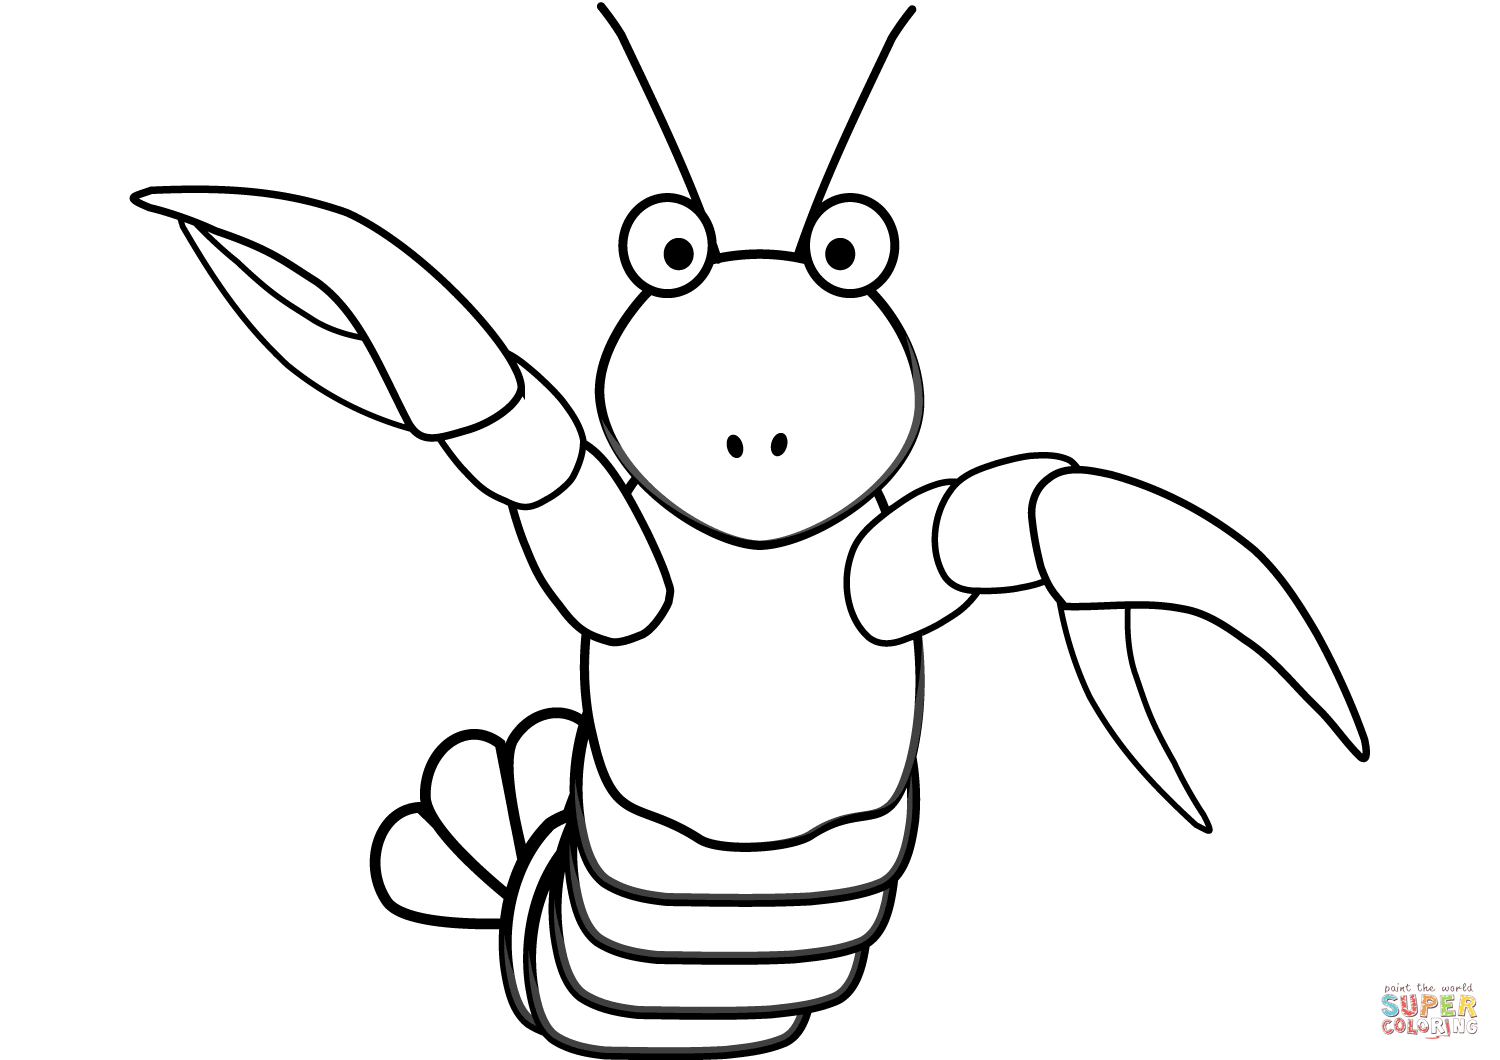 Cartoon lobster coloring page free printable coloring pages